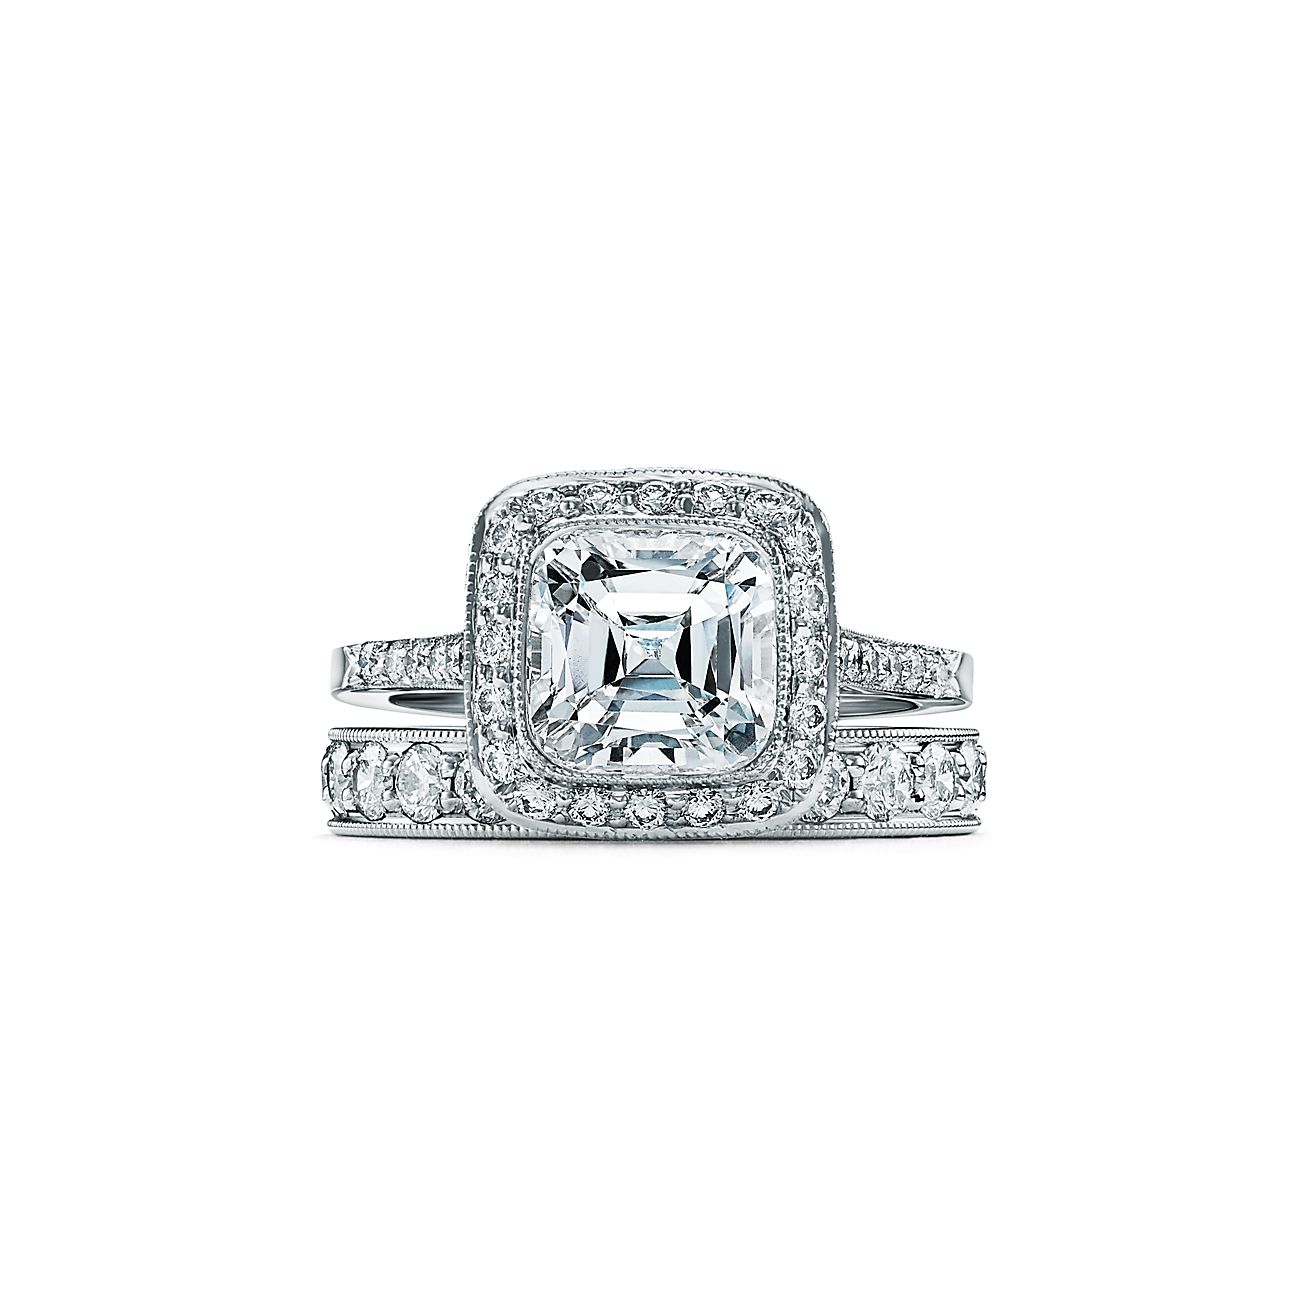 Tiffany Legacy™ Engagement Ring with a 